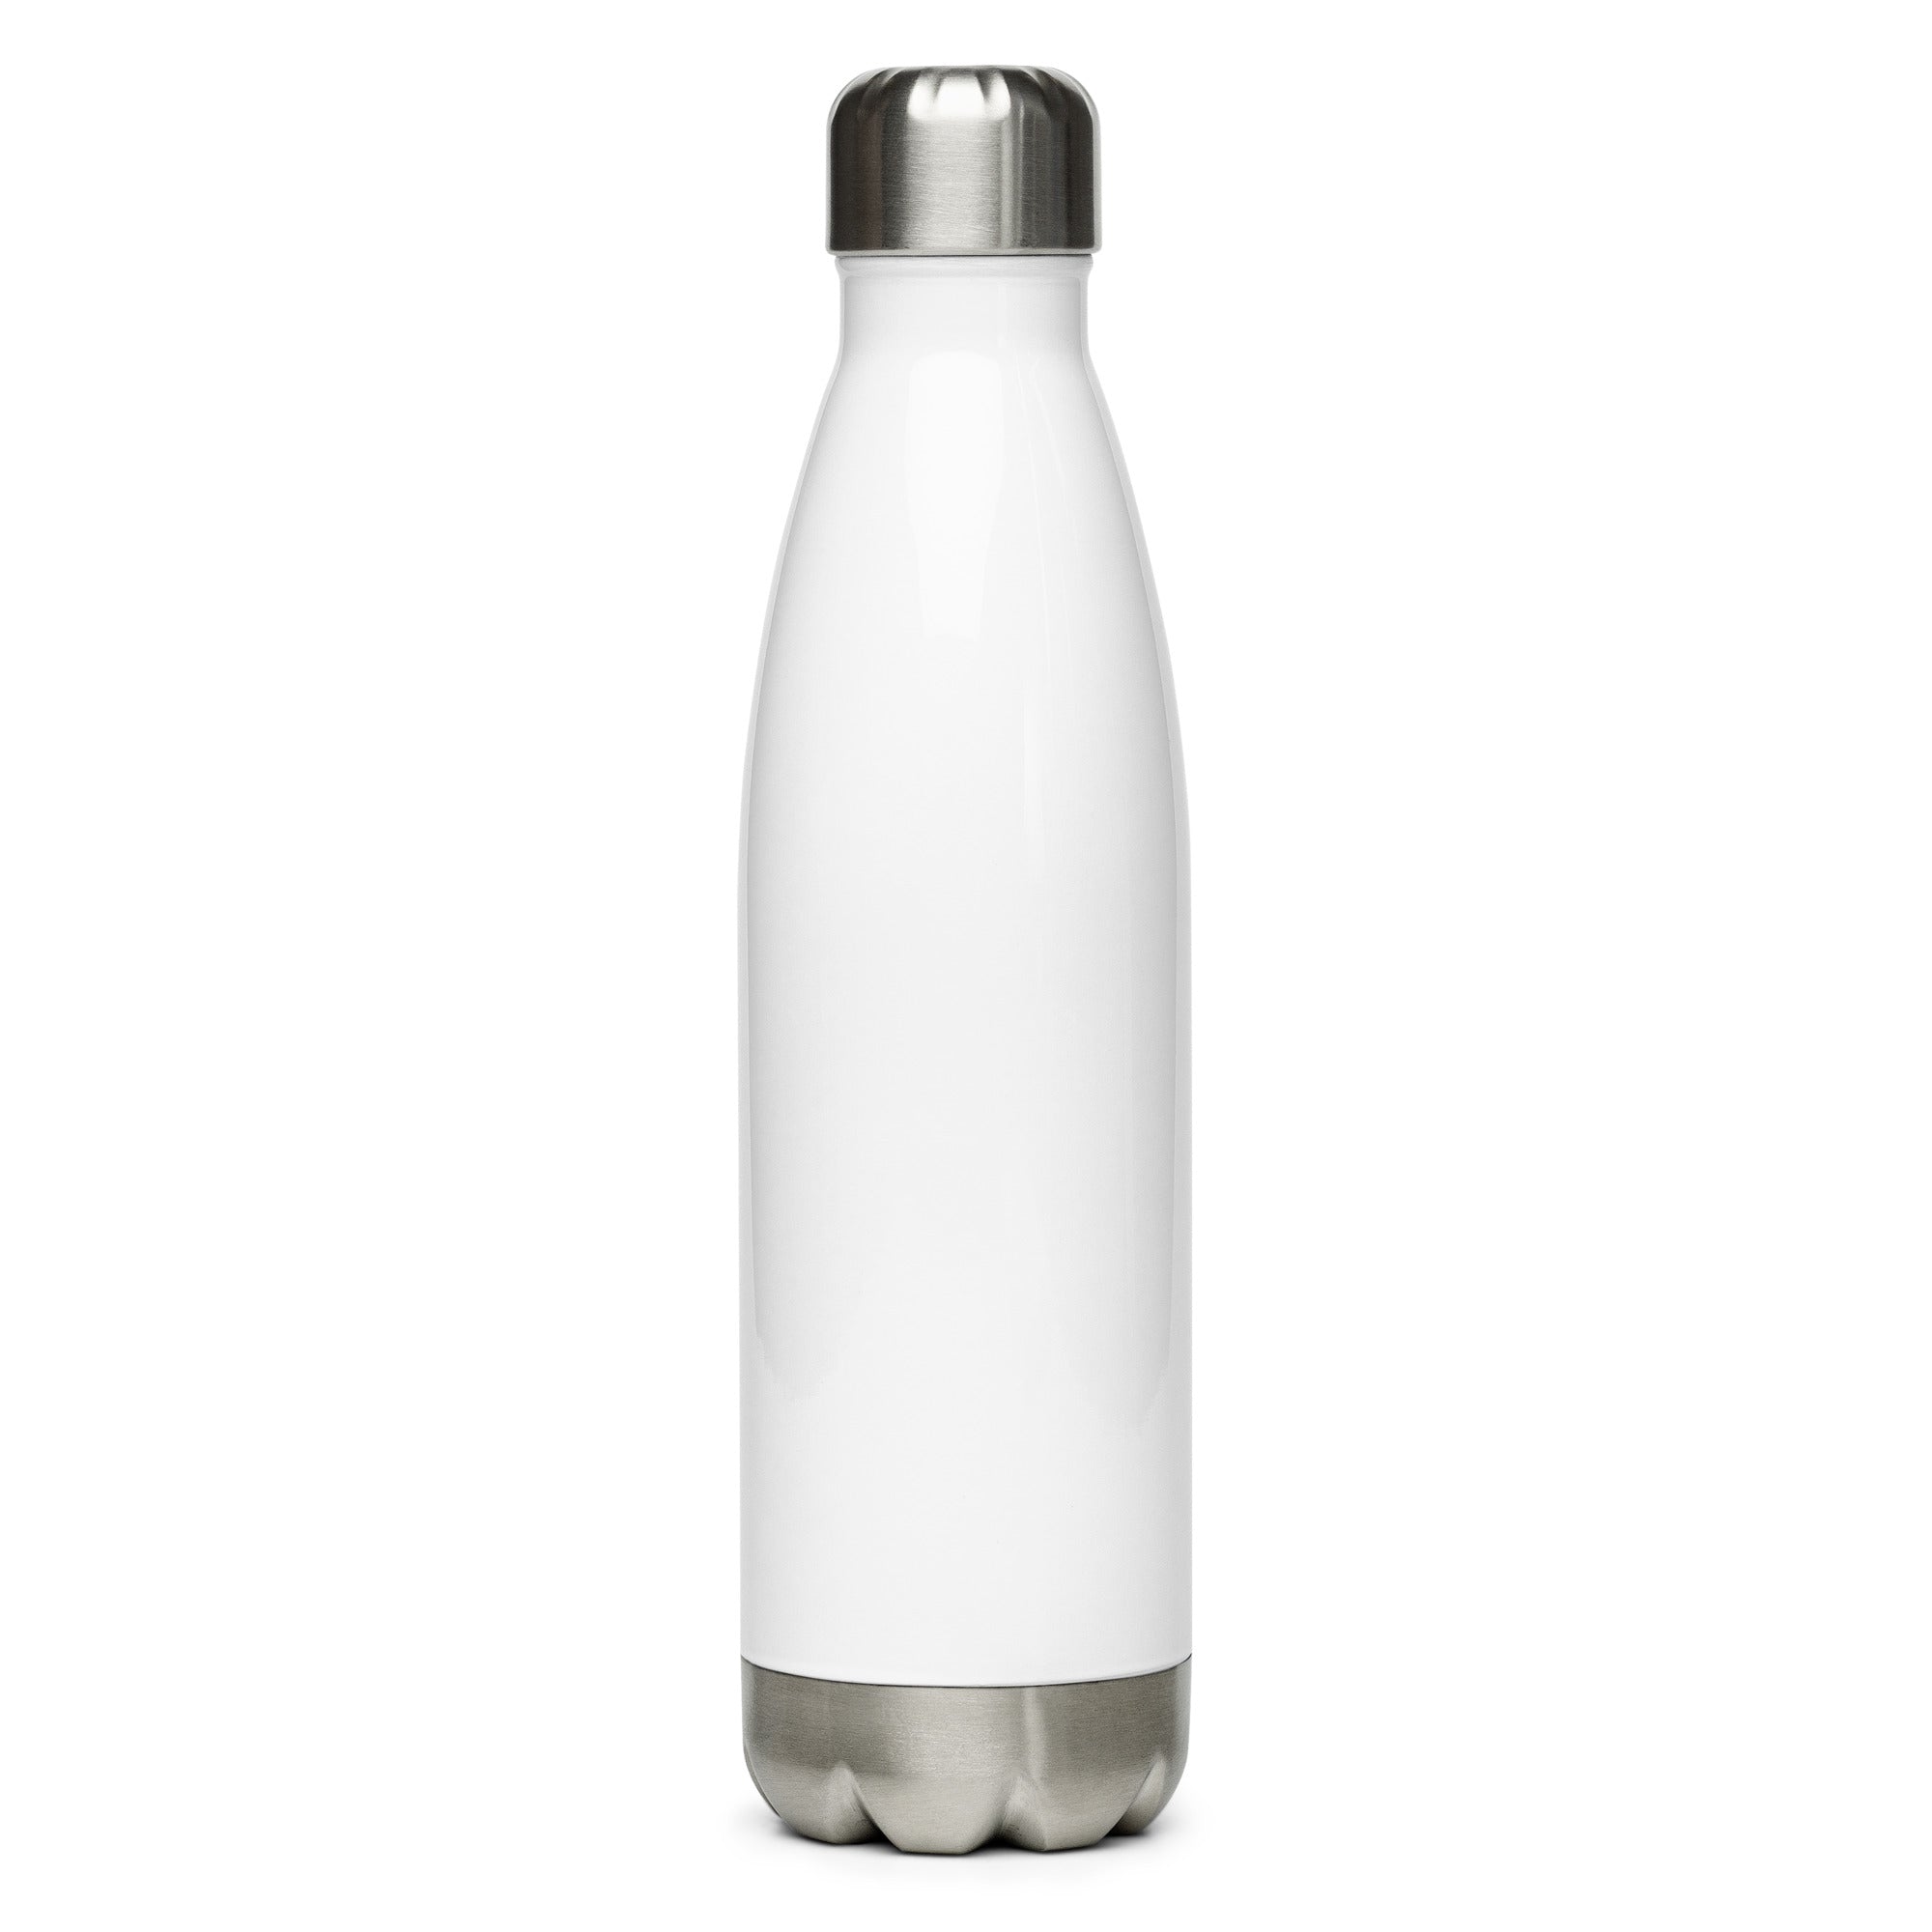 Indiana Broncos Stainless Steel Water Bottle